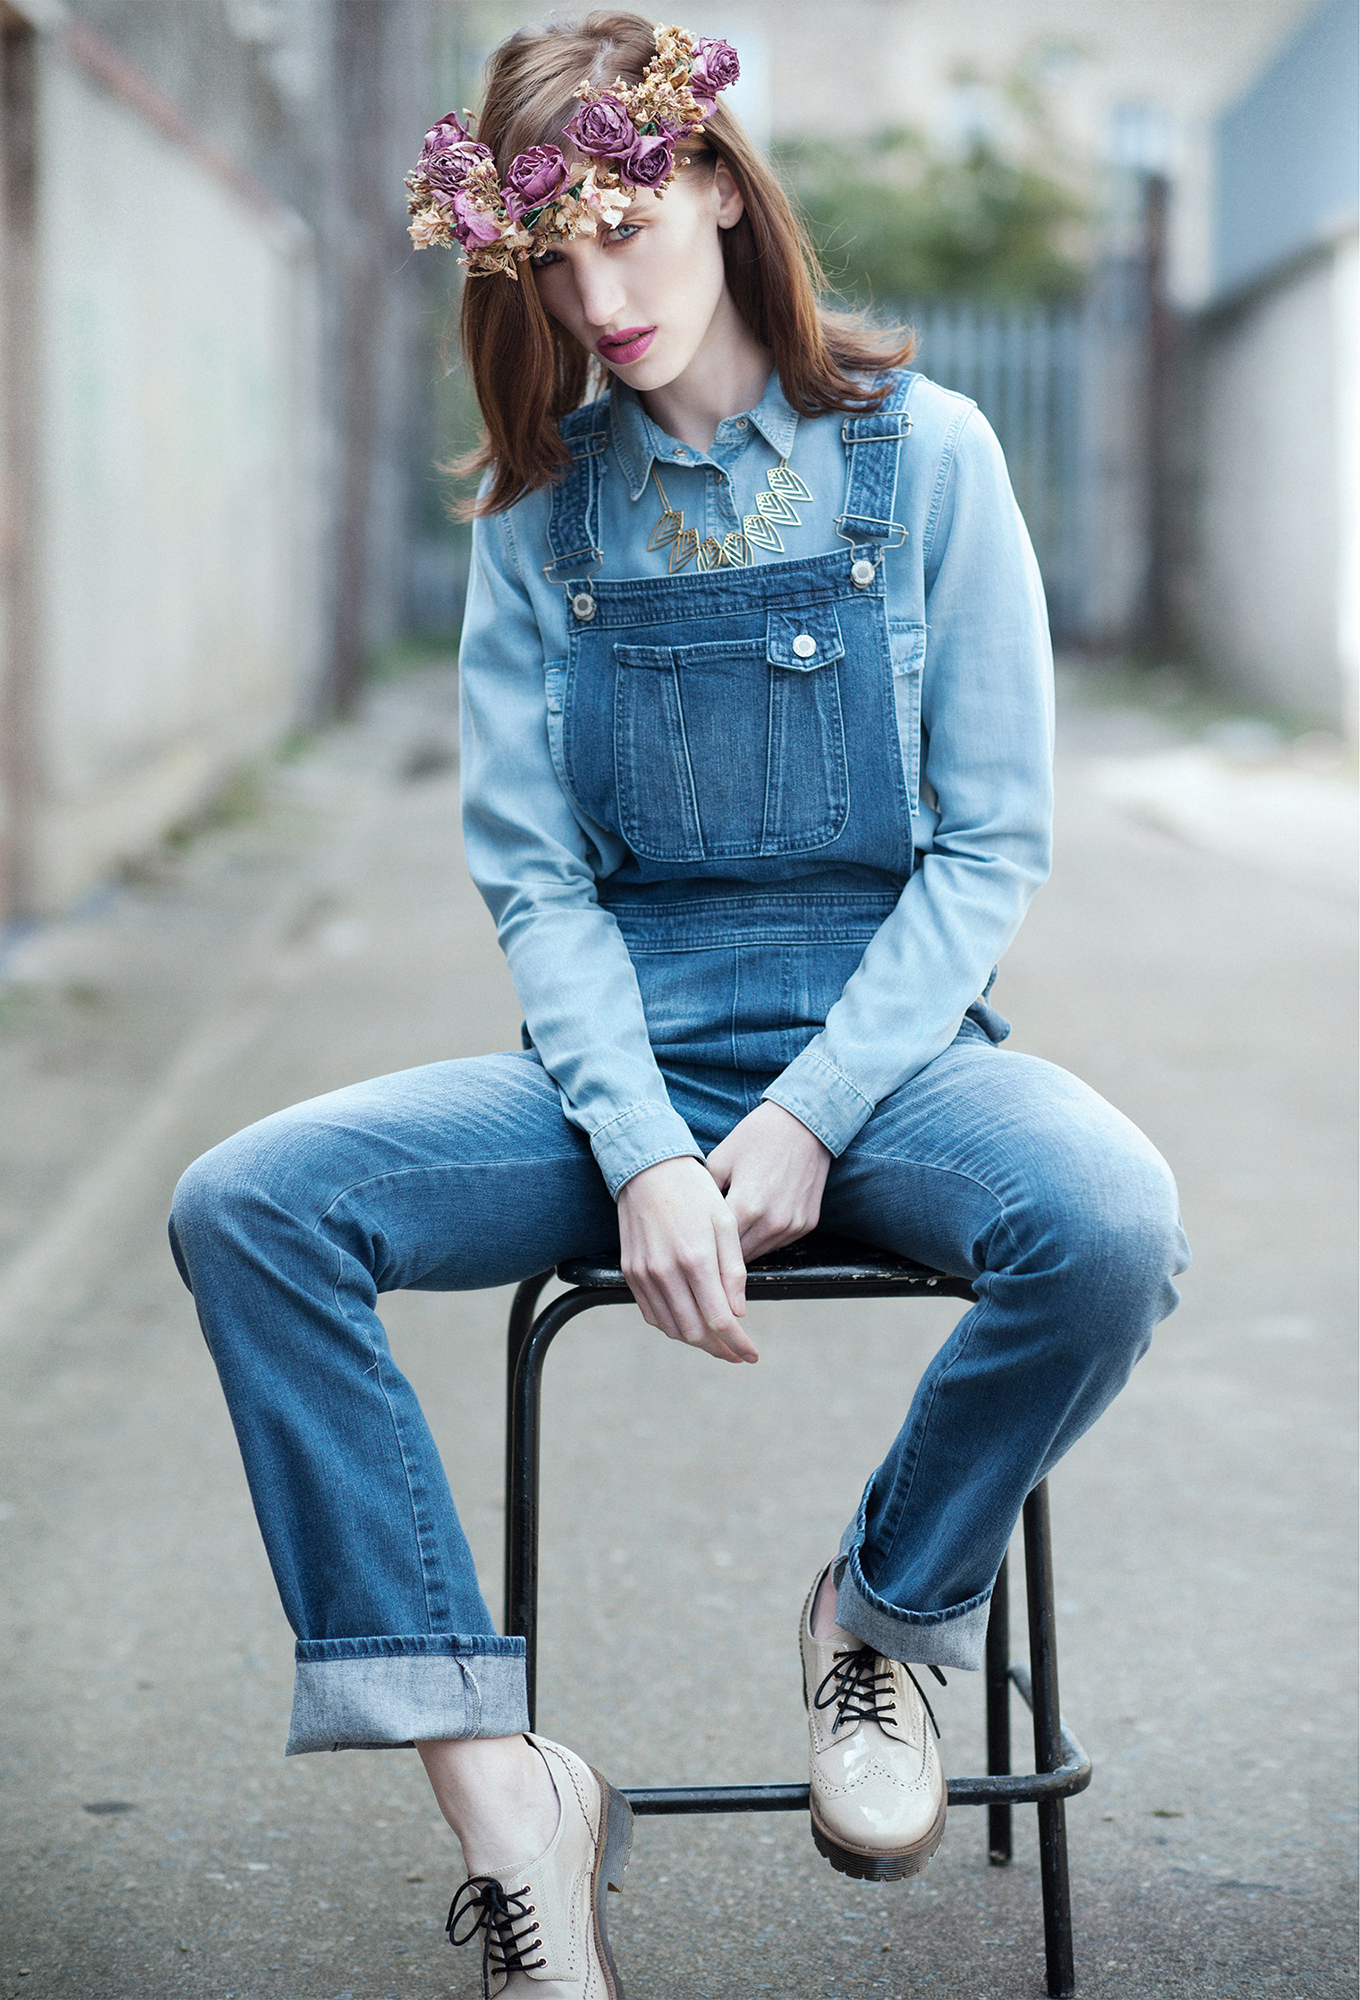 model seating on the cahir wearing denim clothes with flower crown